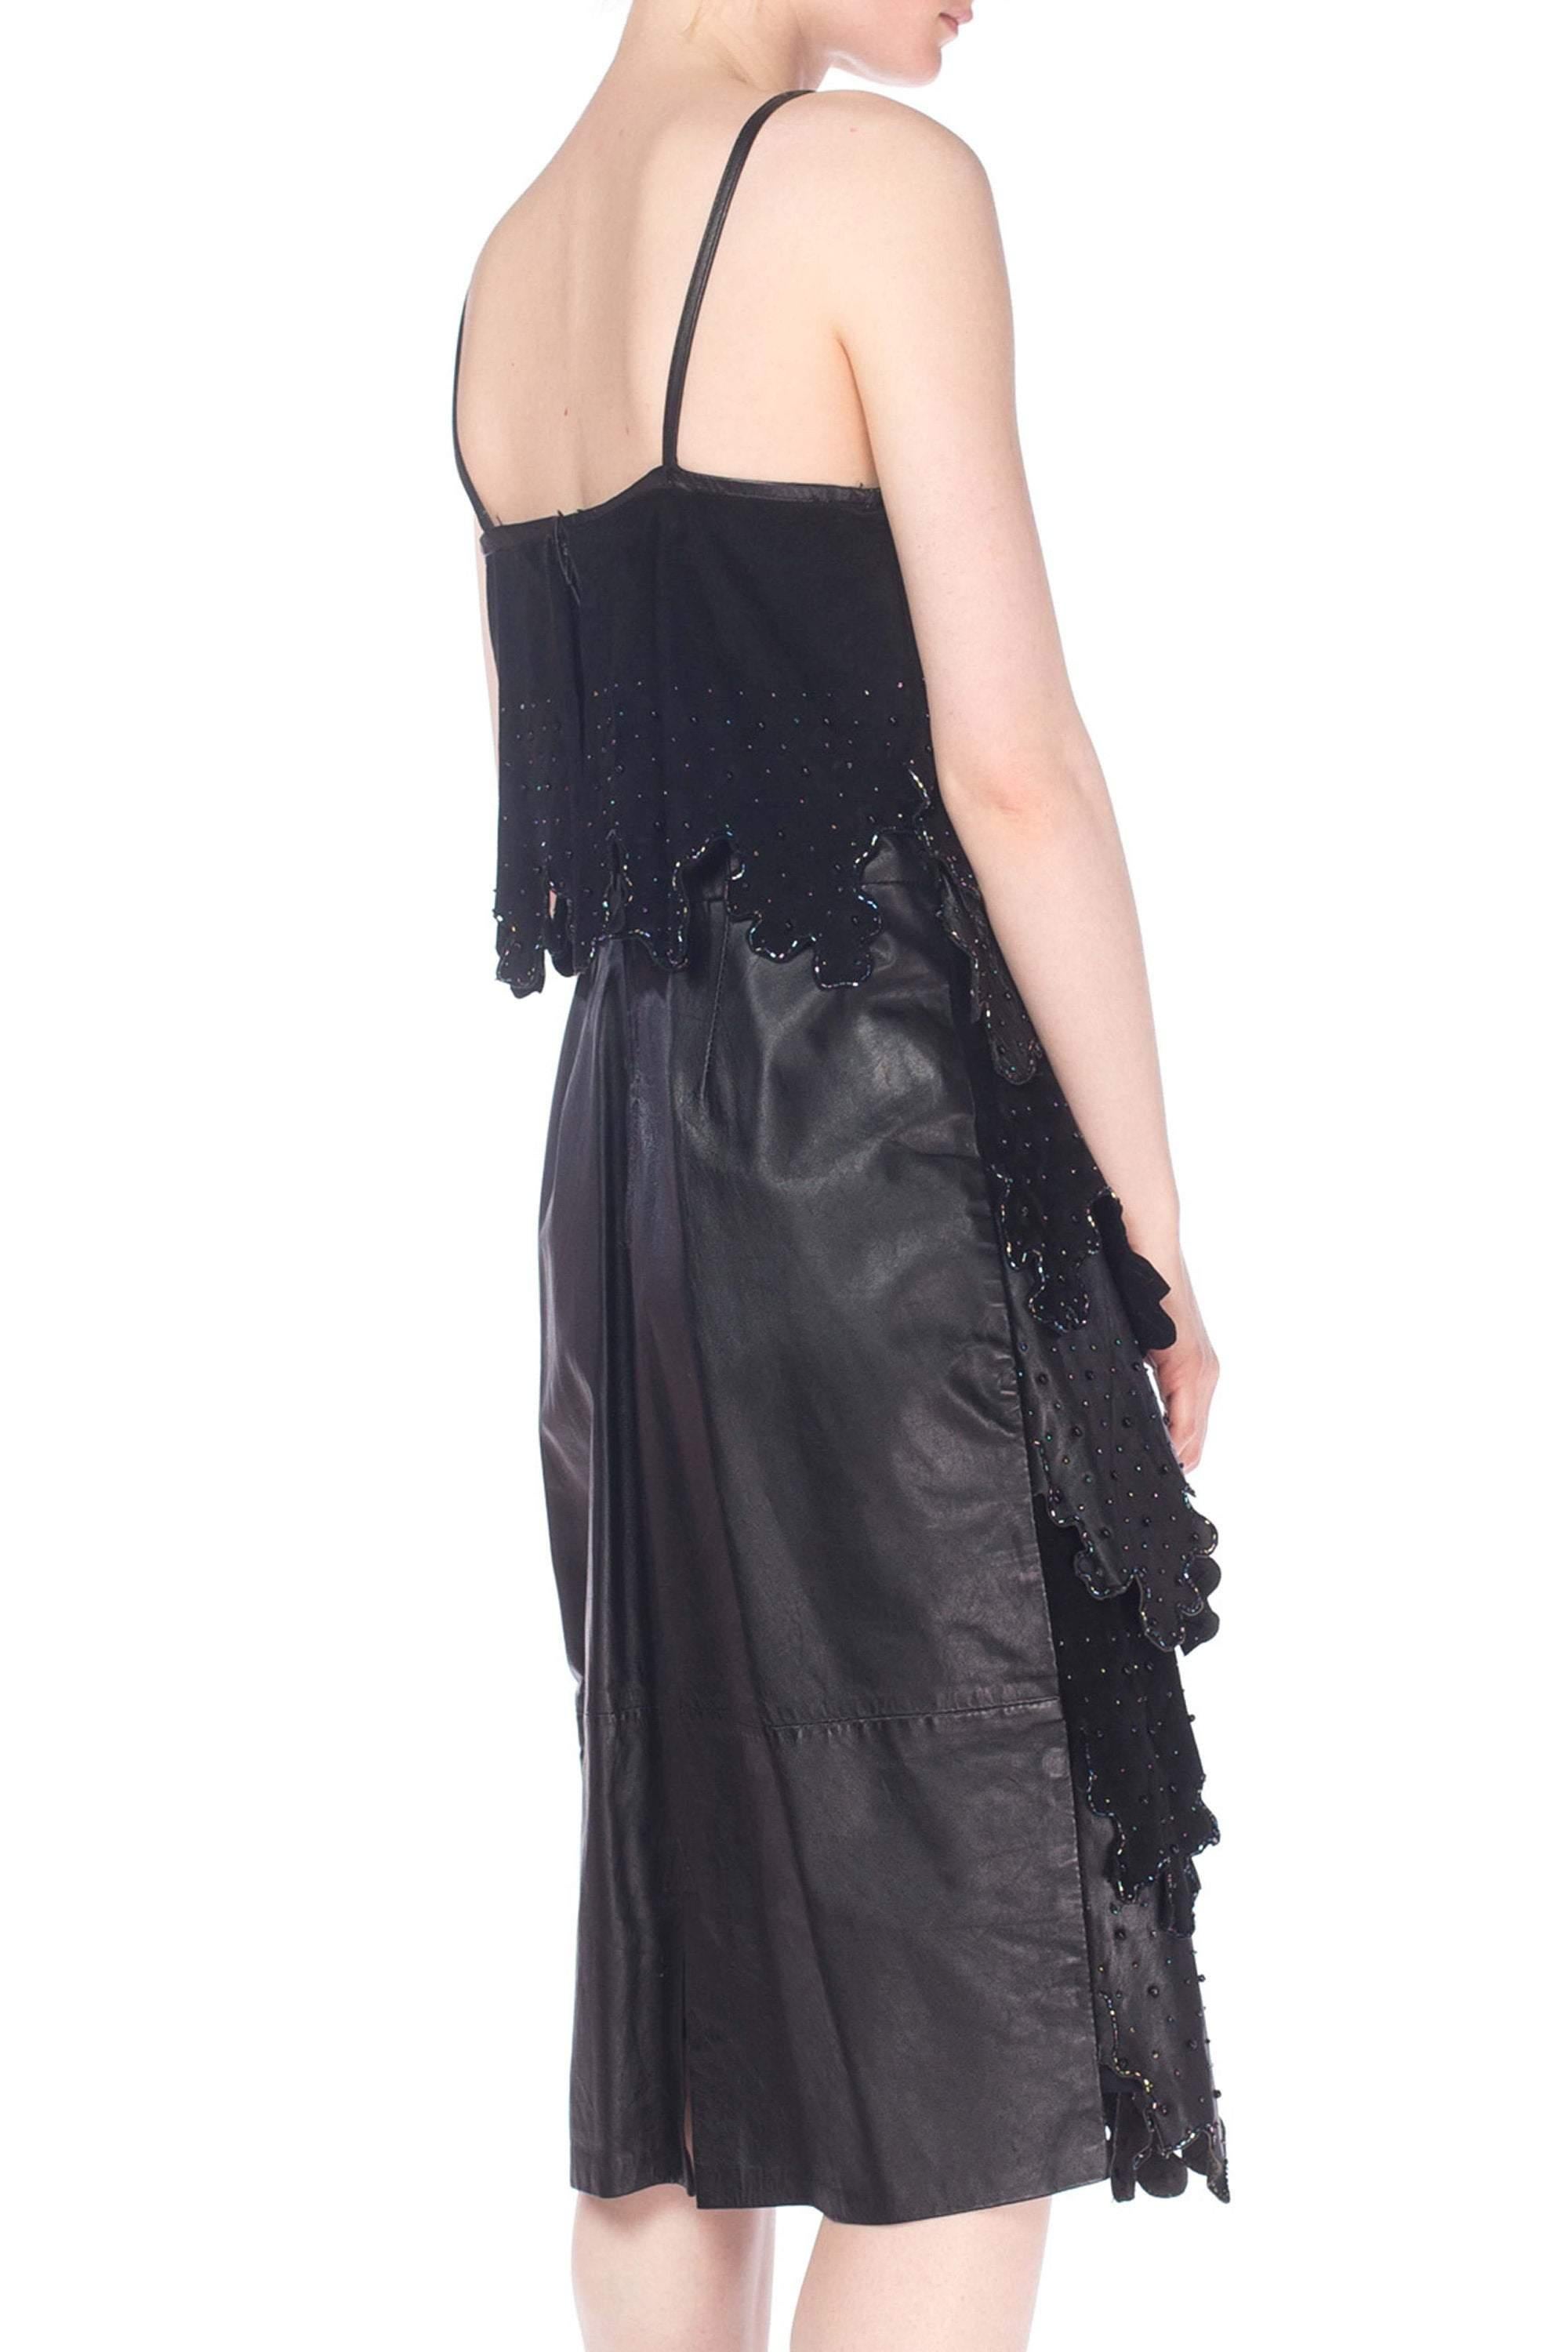 Women's 1980S Black Suede & Leather Beaded Spaghetti Strap  Cocktail Dress With Cut-Out For Sale